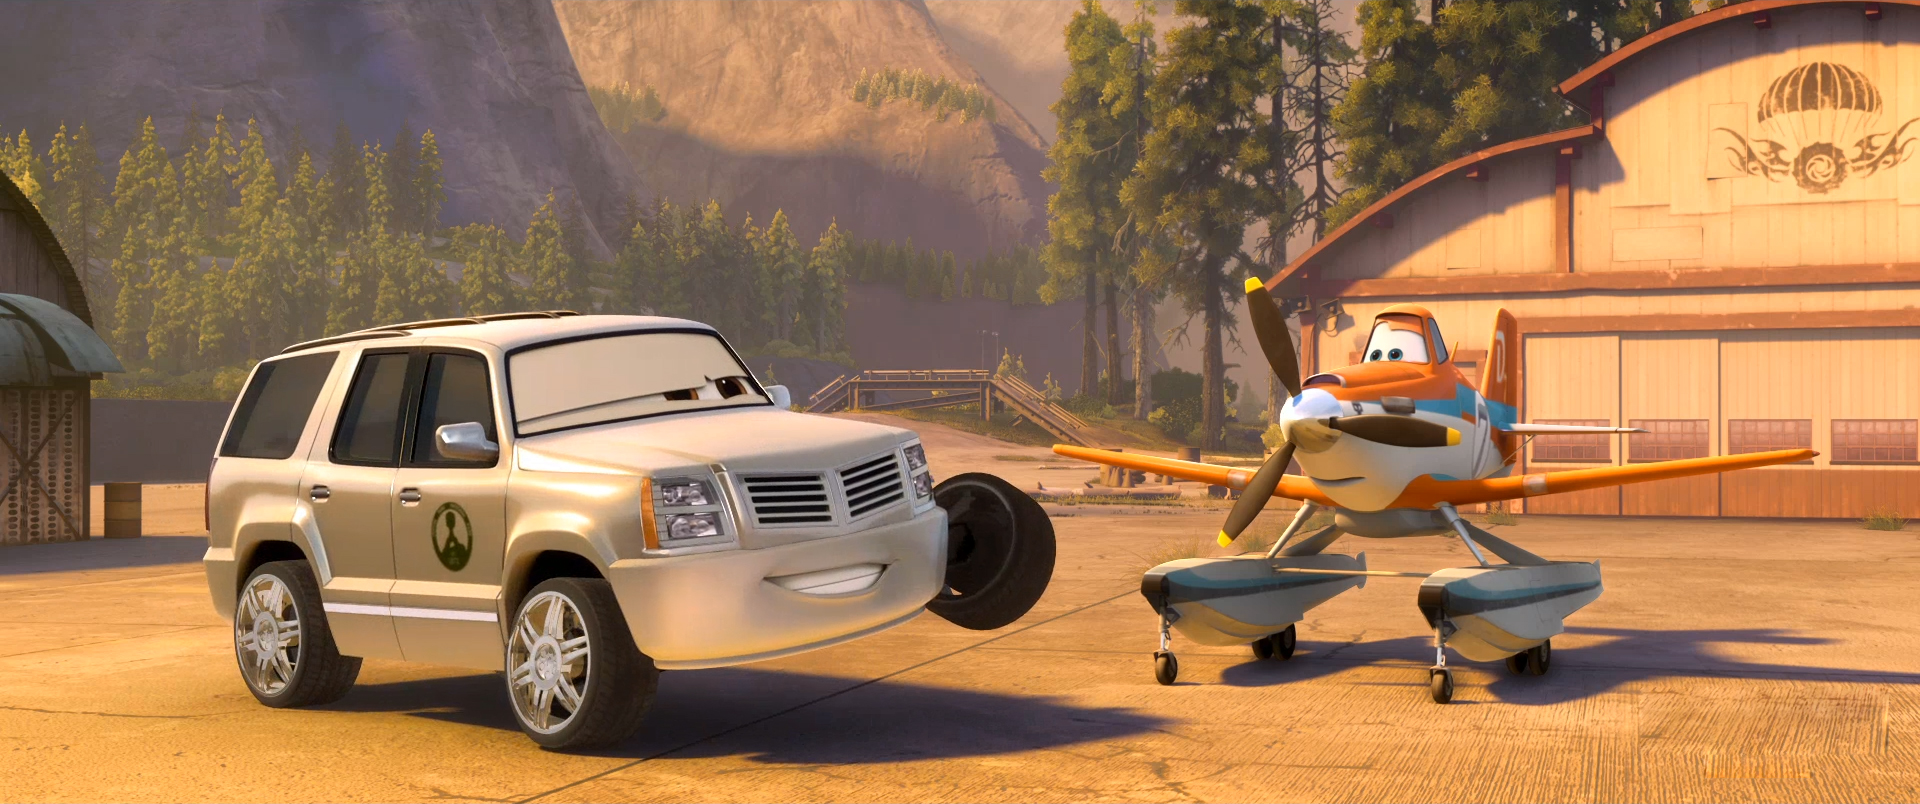 disneys-planes-fire-and-rescue-theatrical-trailer.jpg